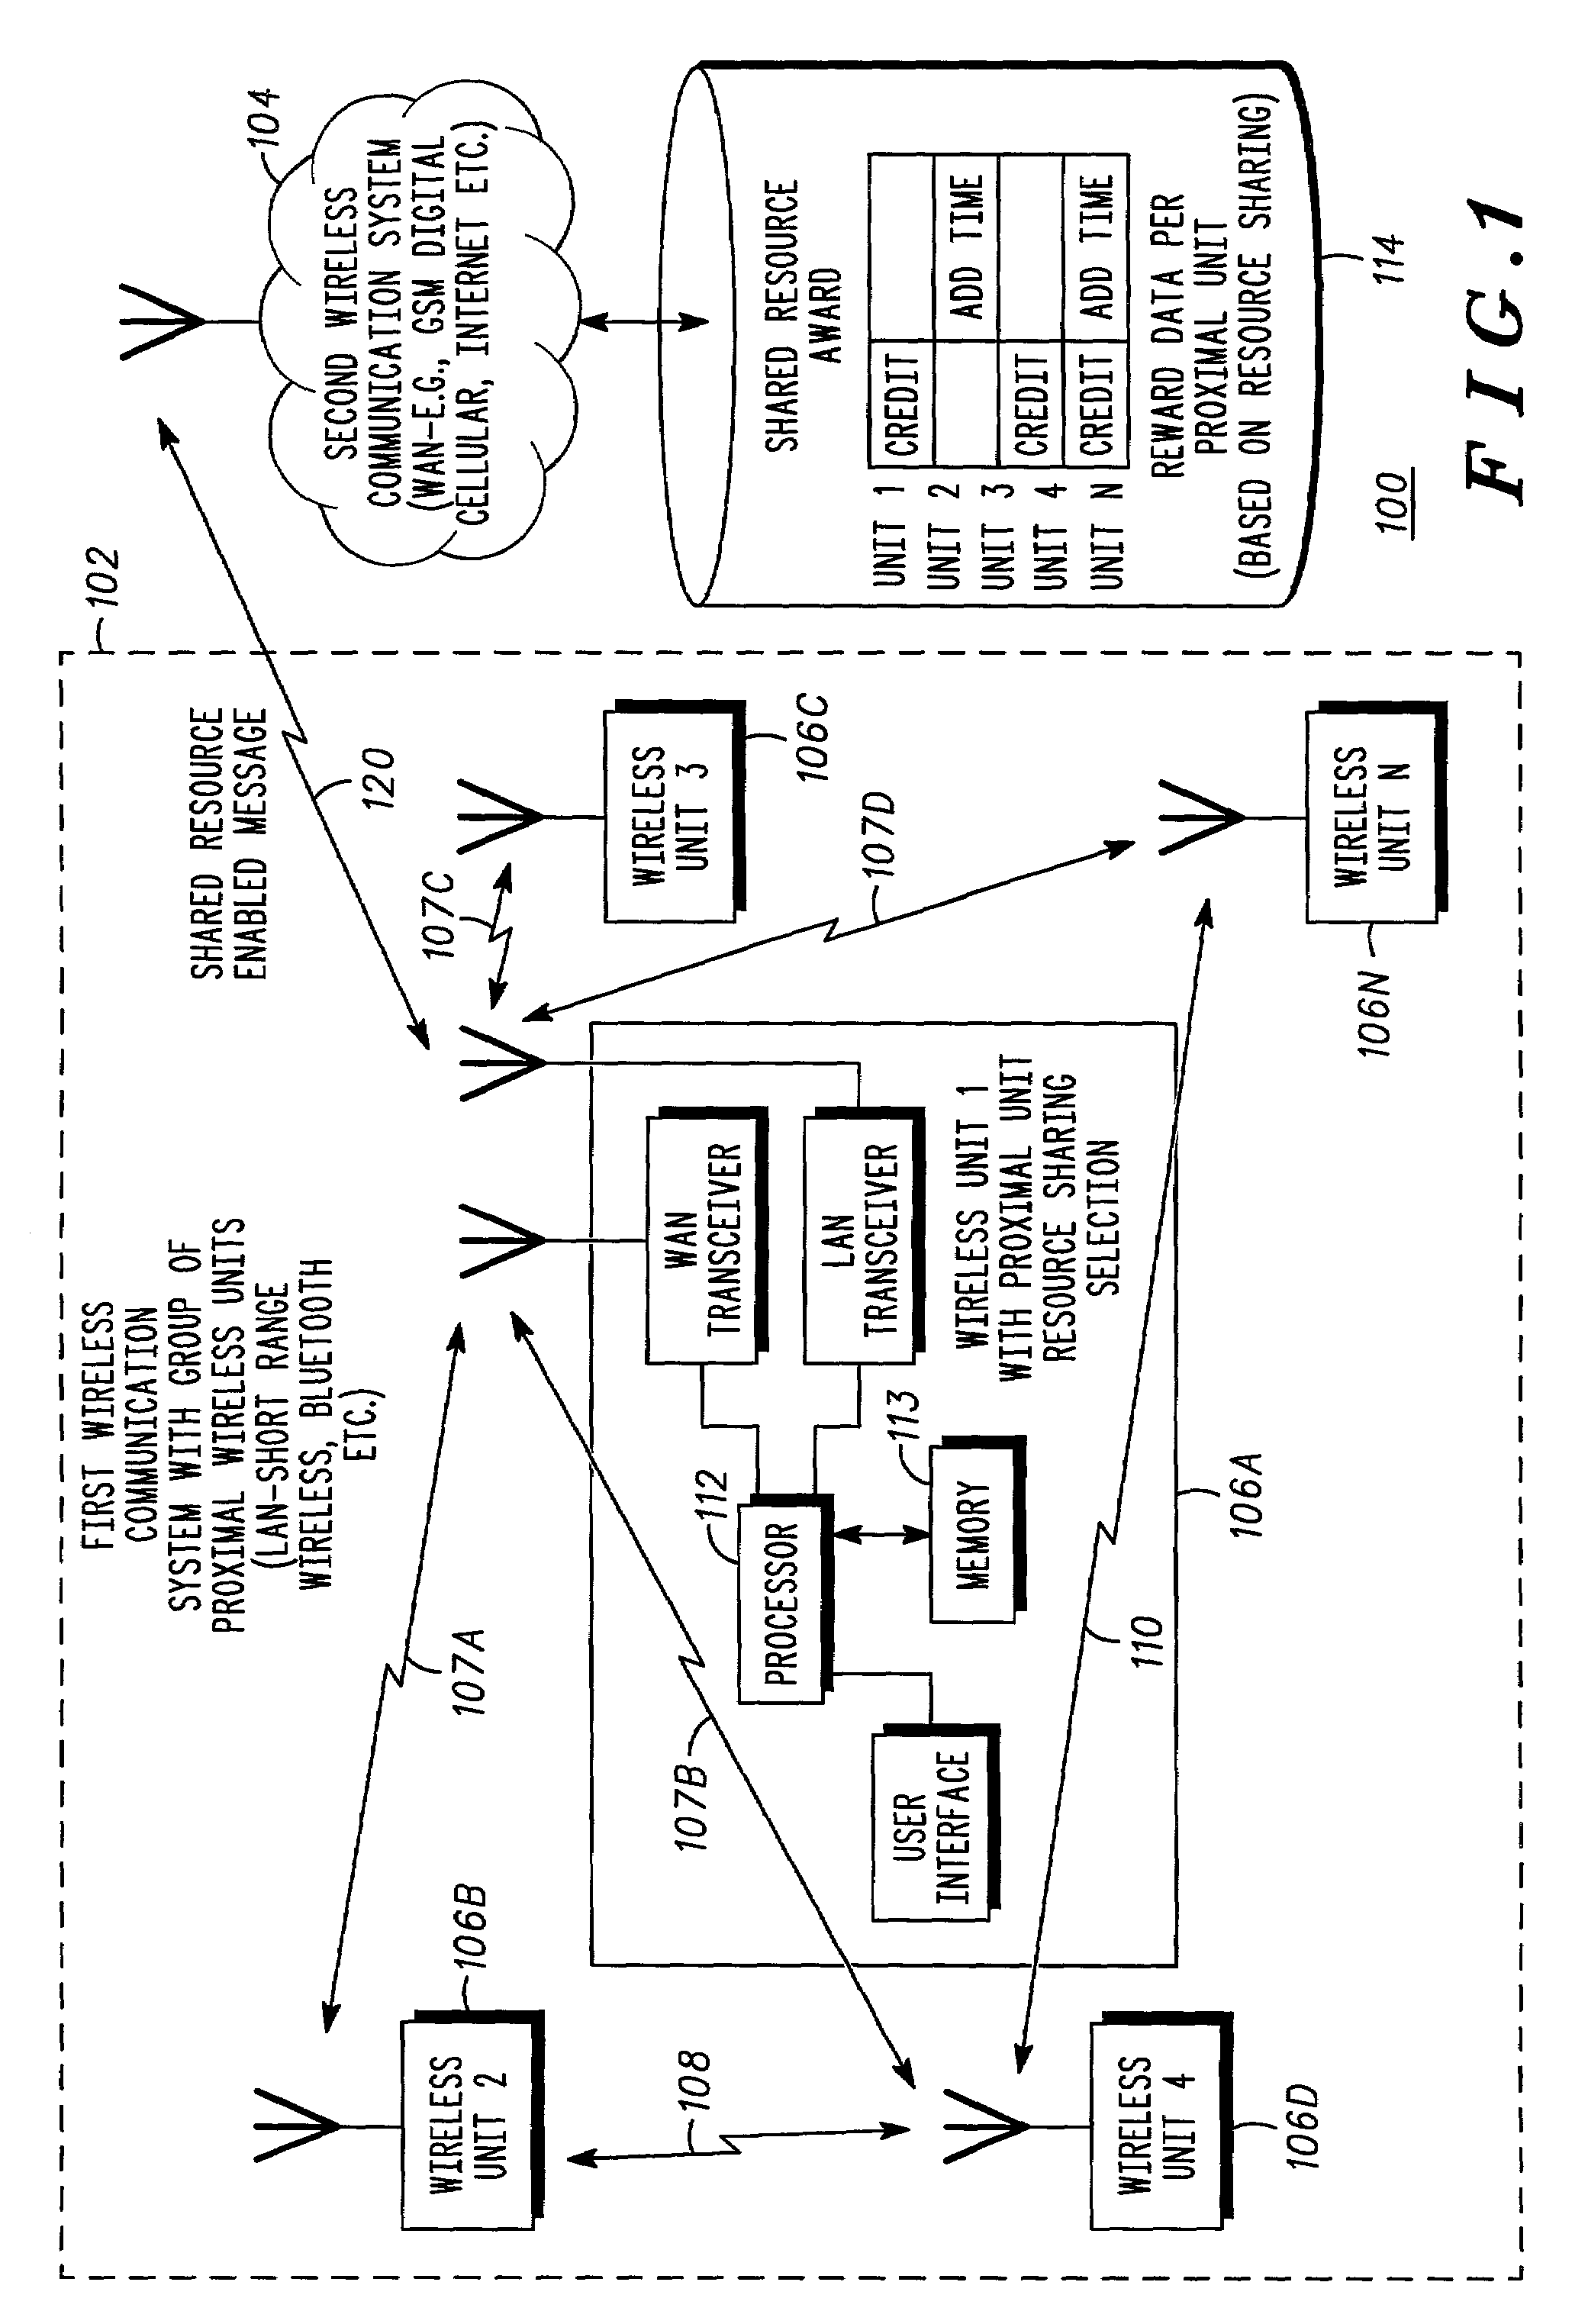 Method and apparatus for enabling and rewarding wireless resource sharing